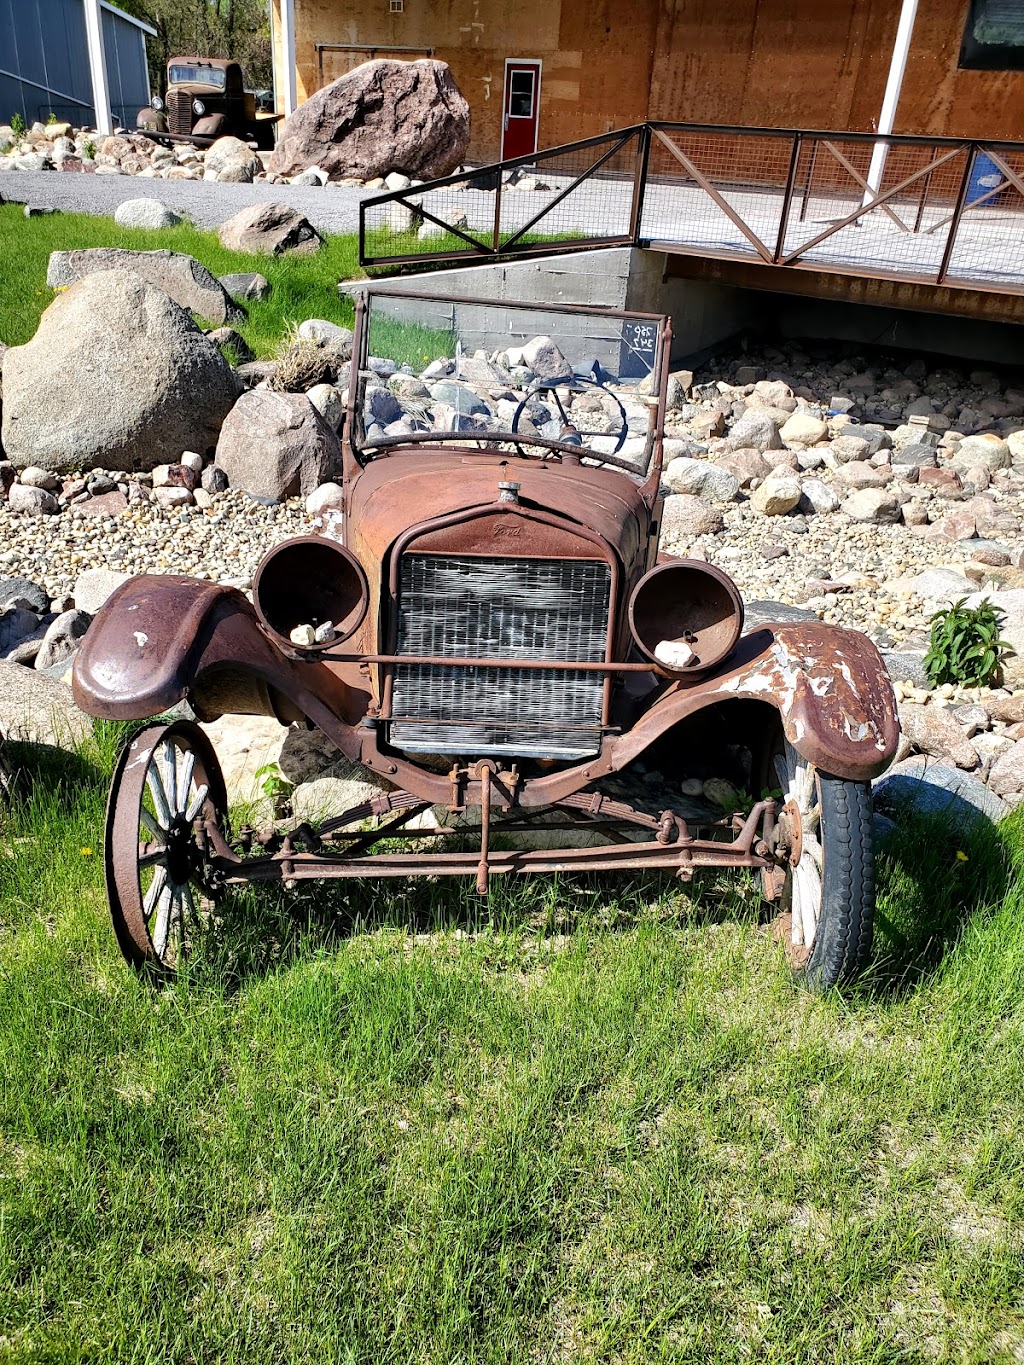 Second Chance Car Museum | museum | Railway avenue and, Vanzile St, Treherne, MB R0G 2V0, Canada | 2042080526 OR +1 204-208-0526